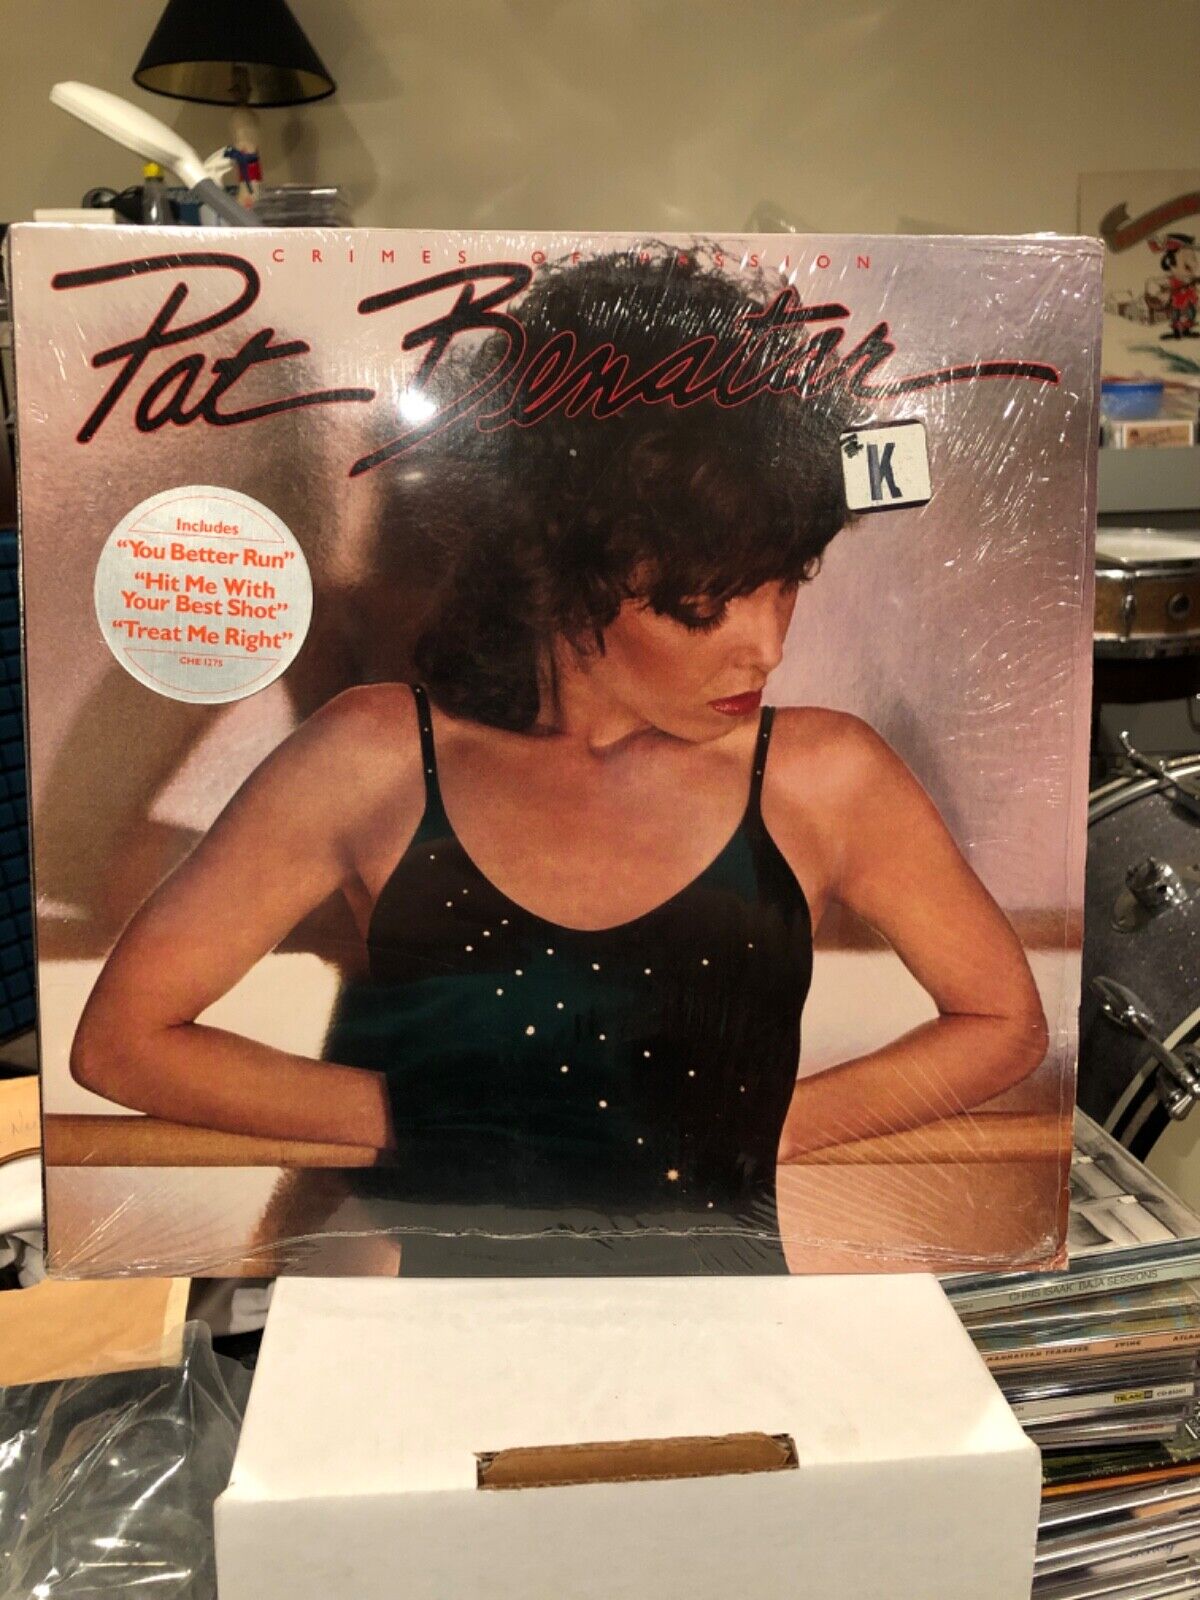 LP - Pat Benatar - Crimes of passion - In shrink with hype sticker  - Hit me wit